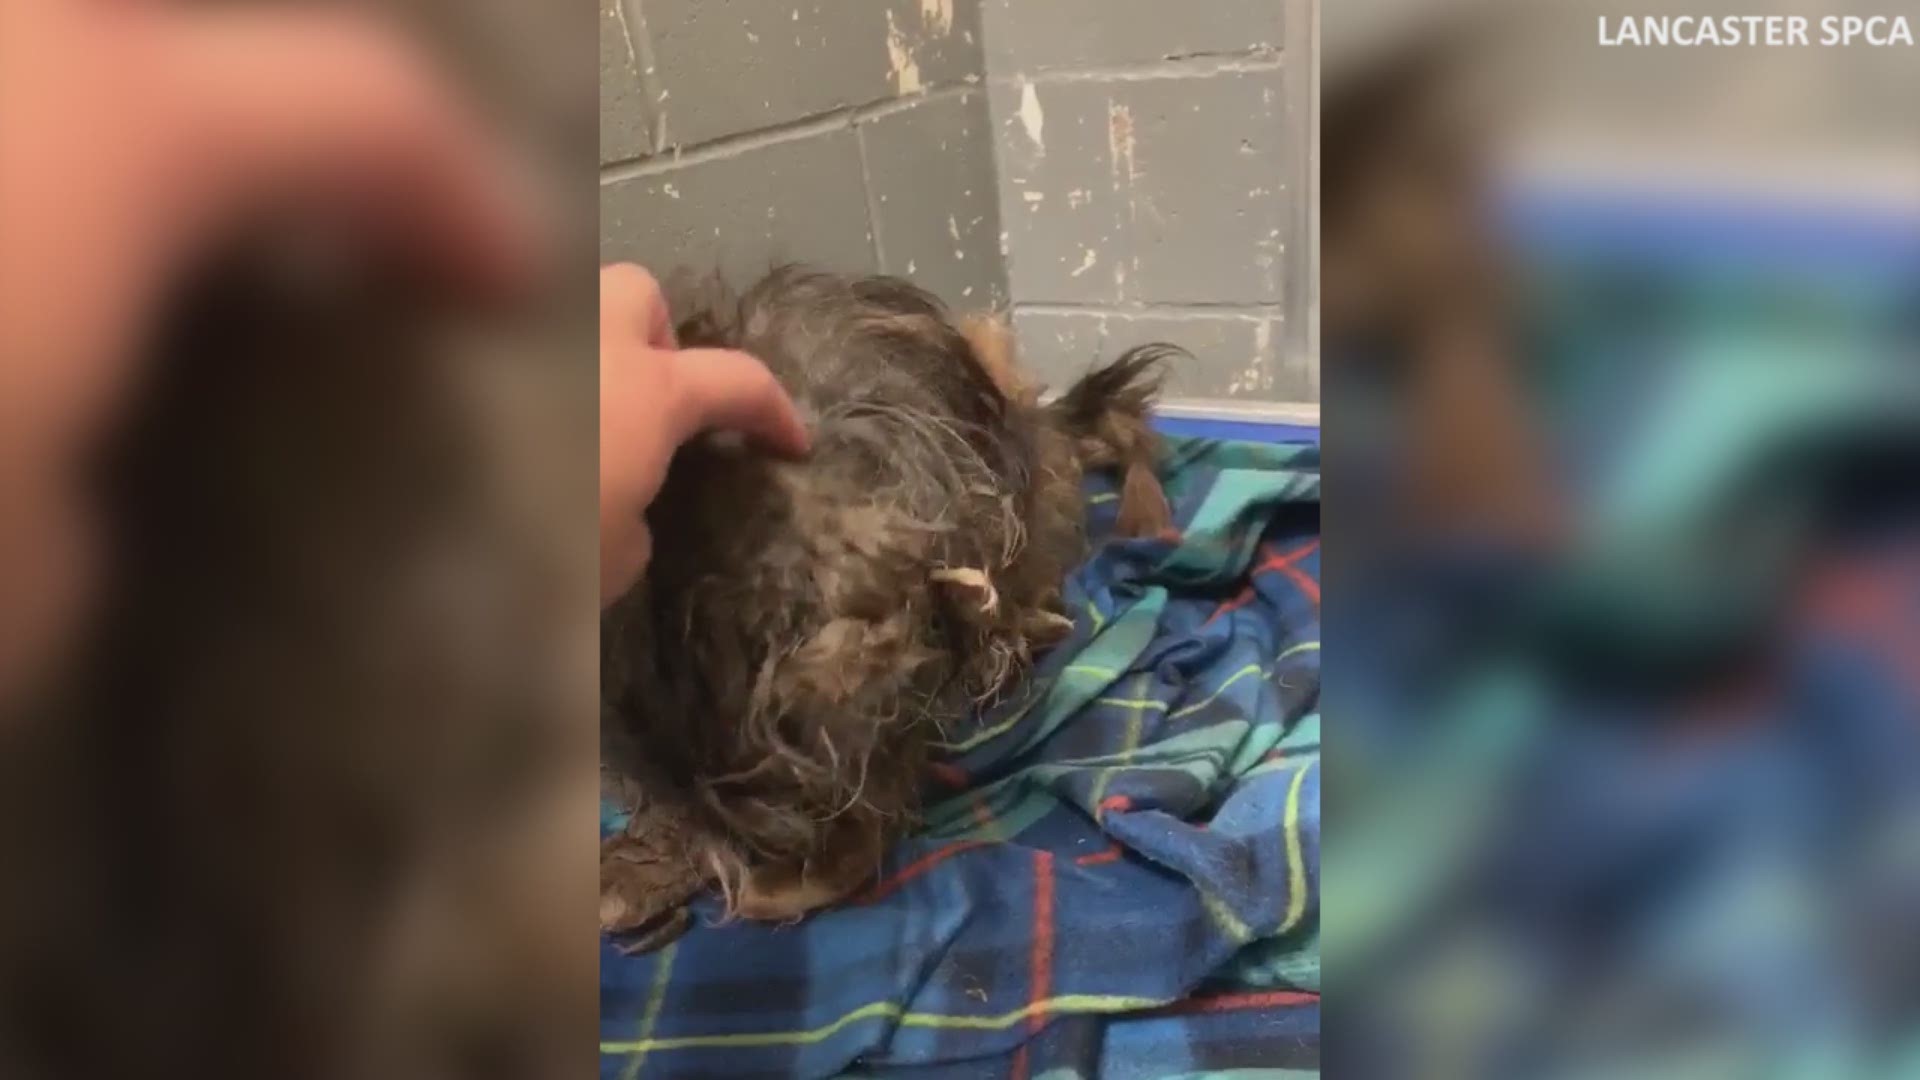 The Lancaster SPCA shared video of a Shih Tzu before she received much-needed grooming.